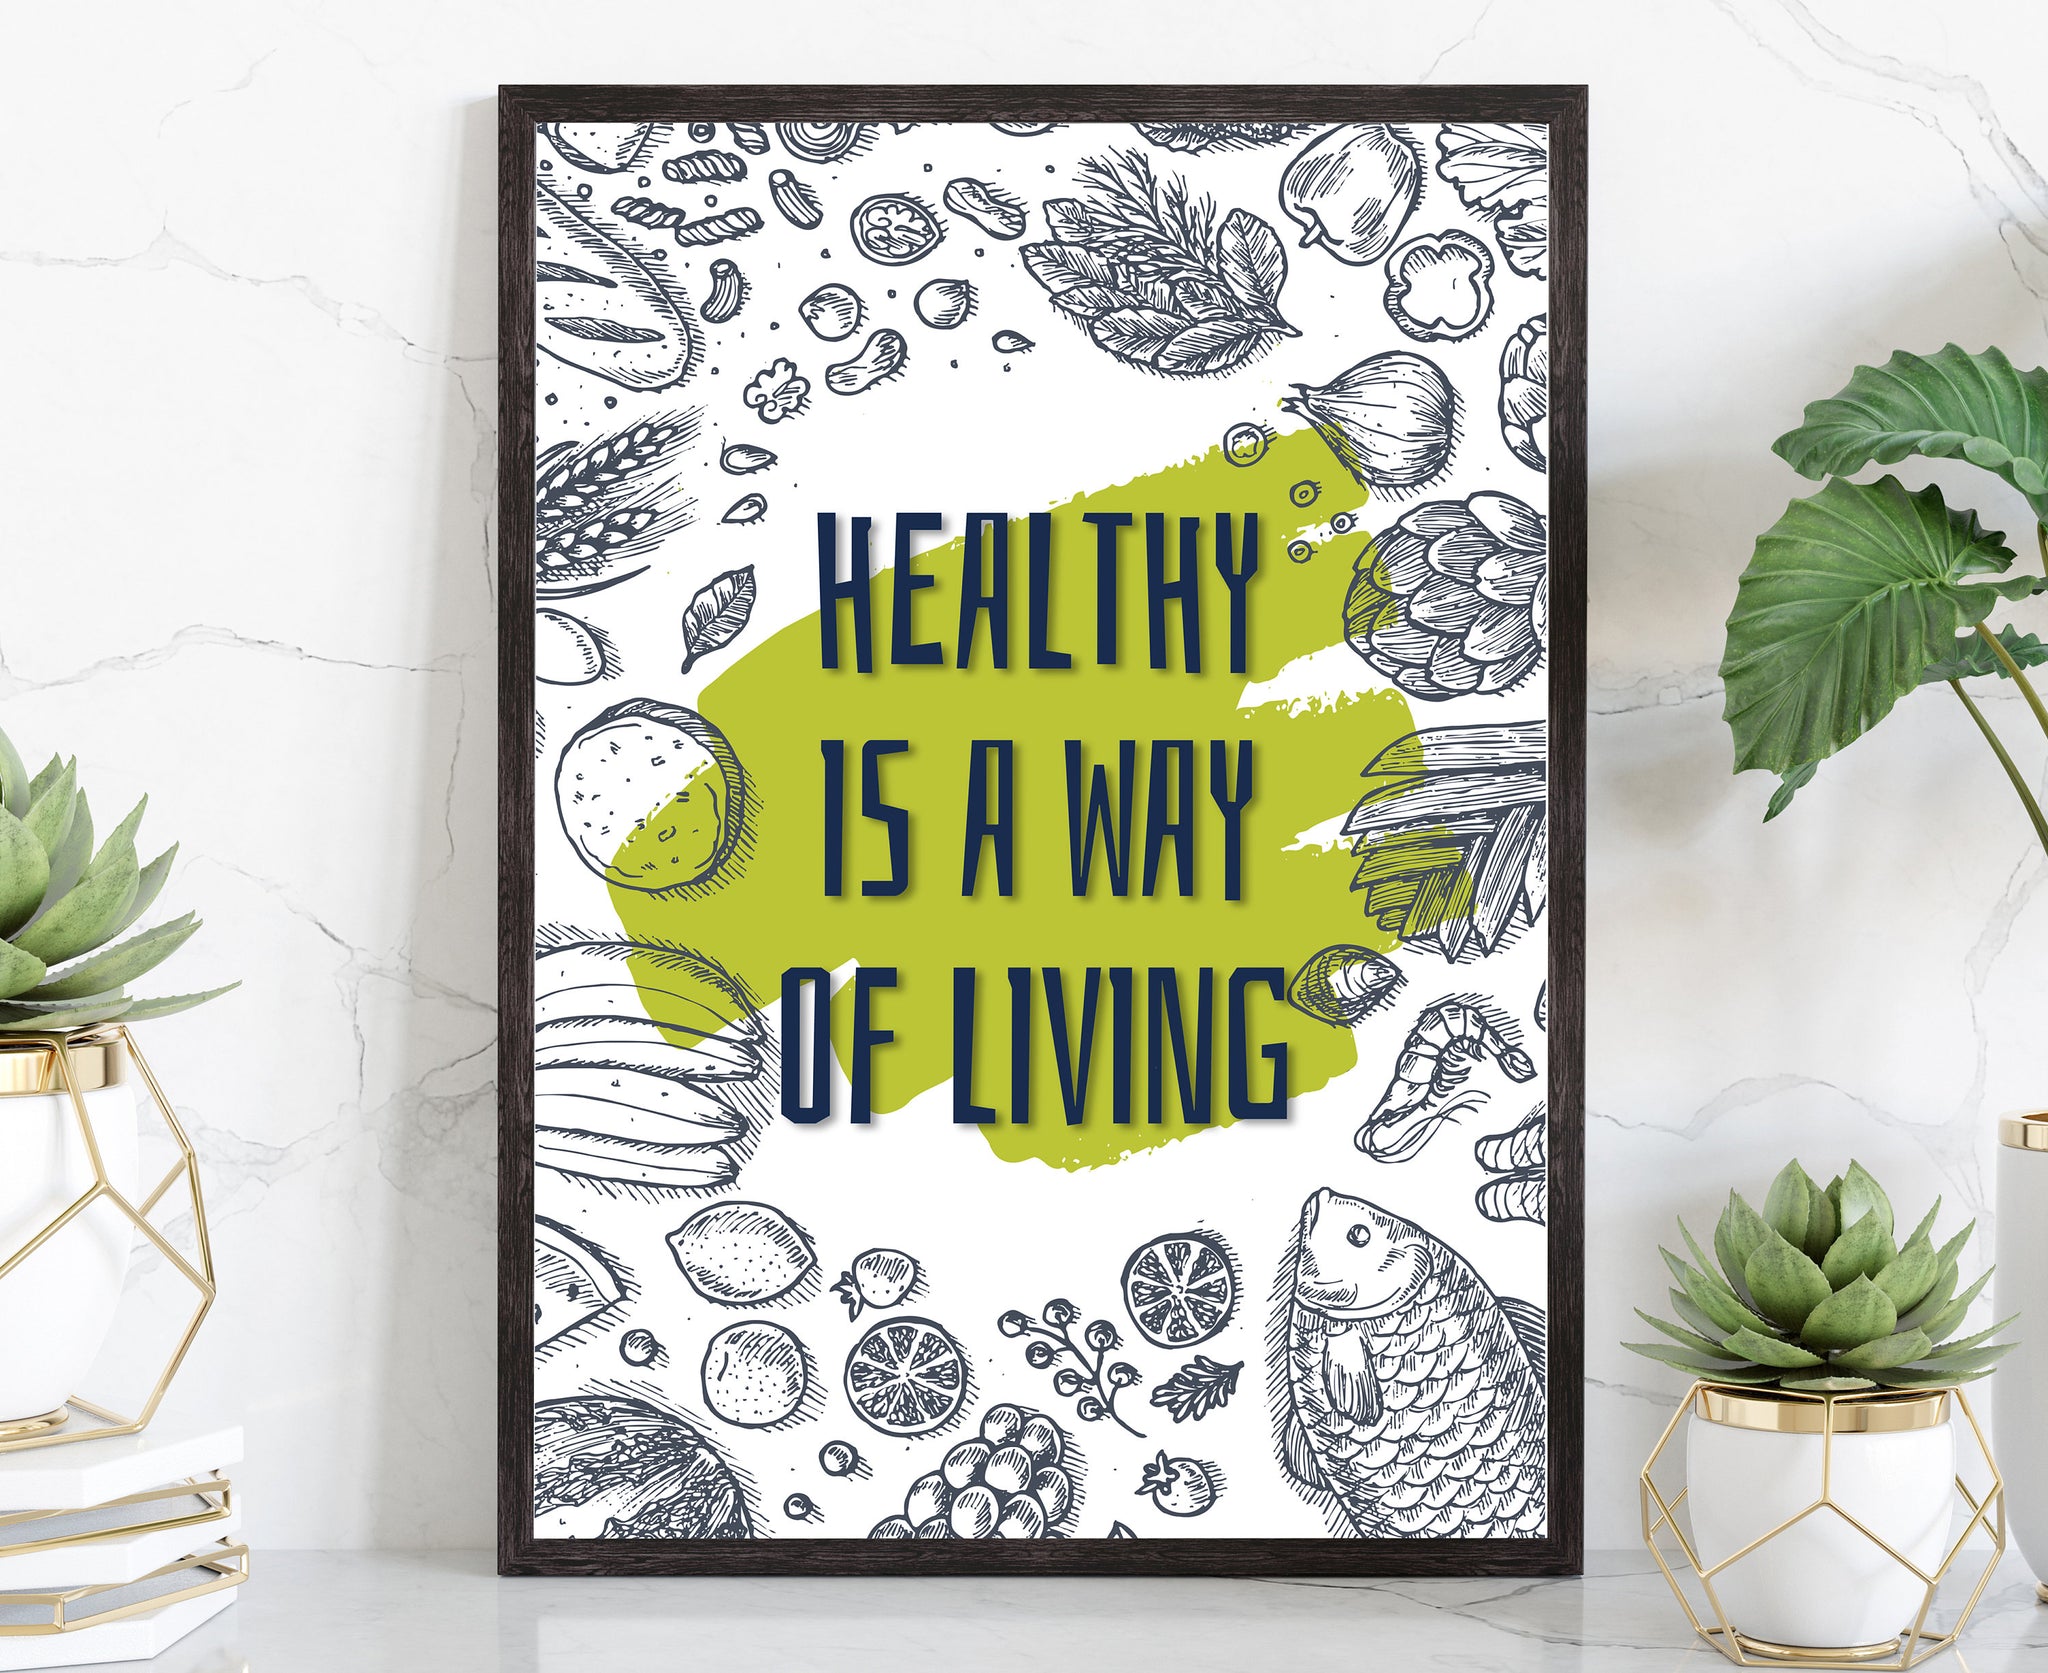 Healthy is a way of.., Gym Poster, Gym quote, Home gym, Home gym décor, Home gym poster, Inspired poster, Fitness décor,Motivational quote